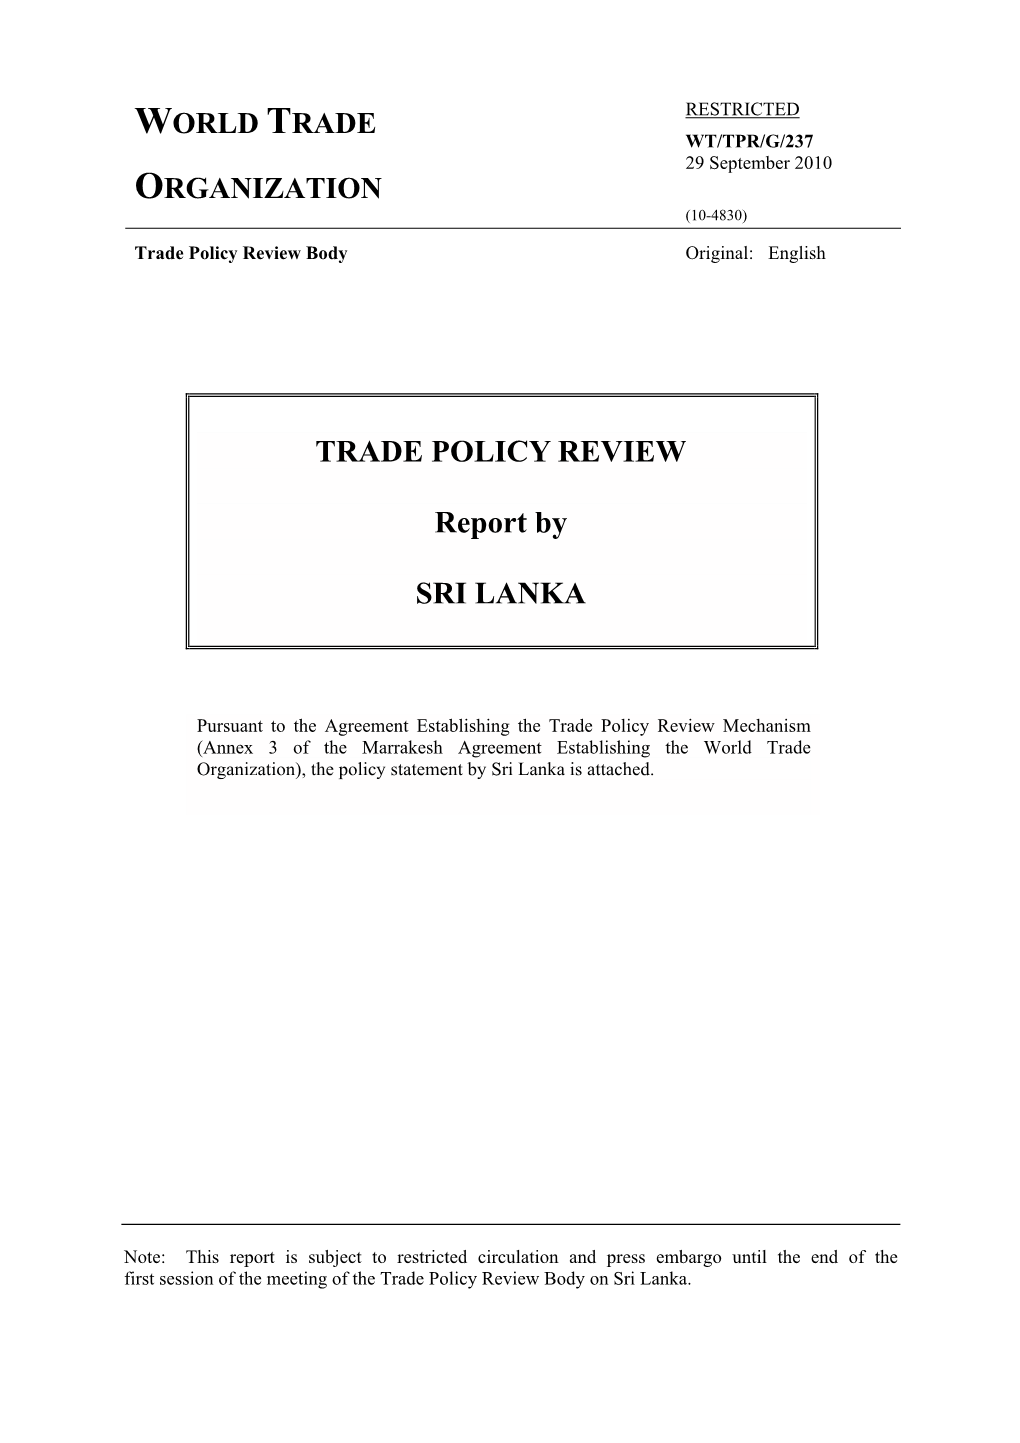 TRADE POLICY REVIEW Report by SRI LANKA